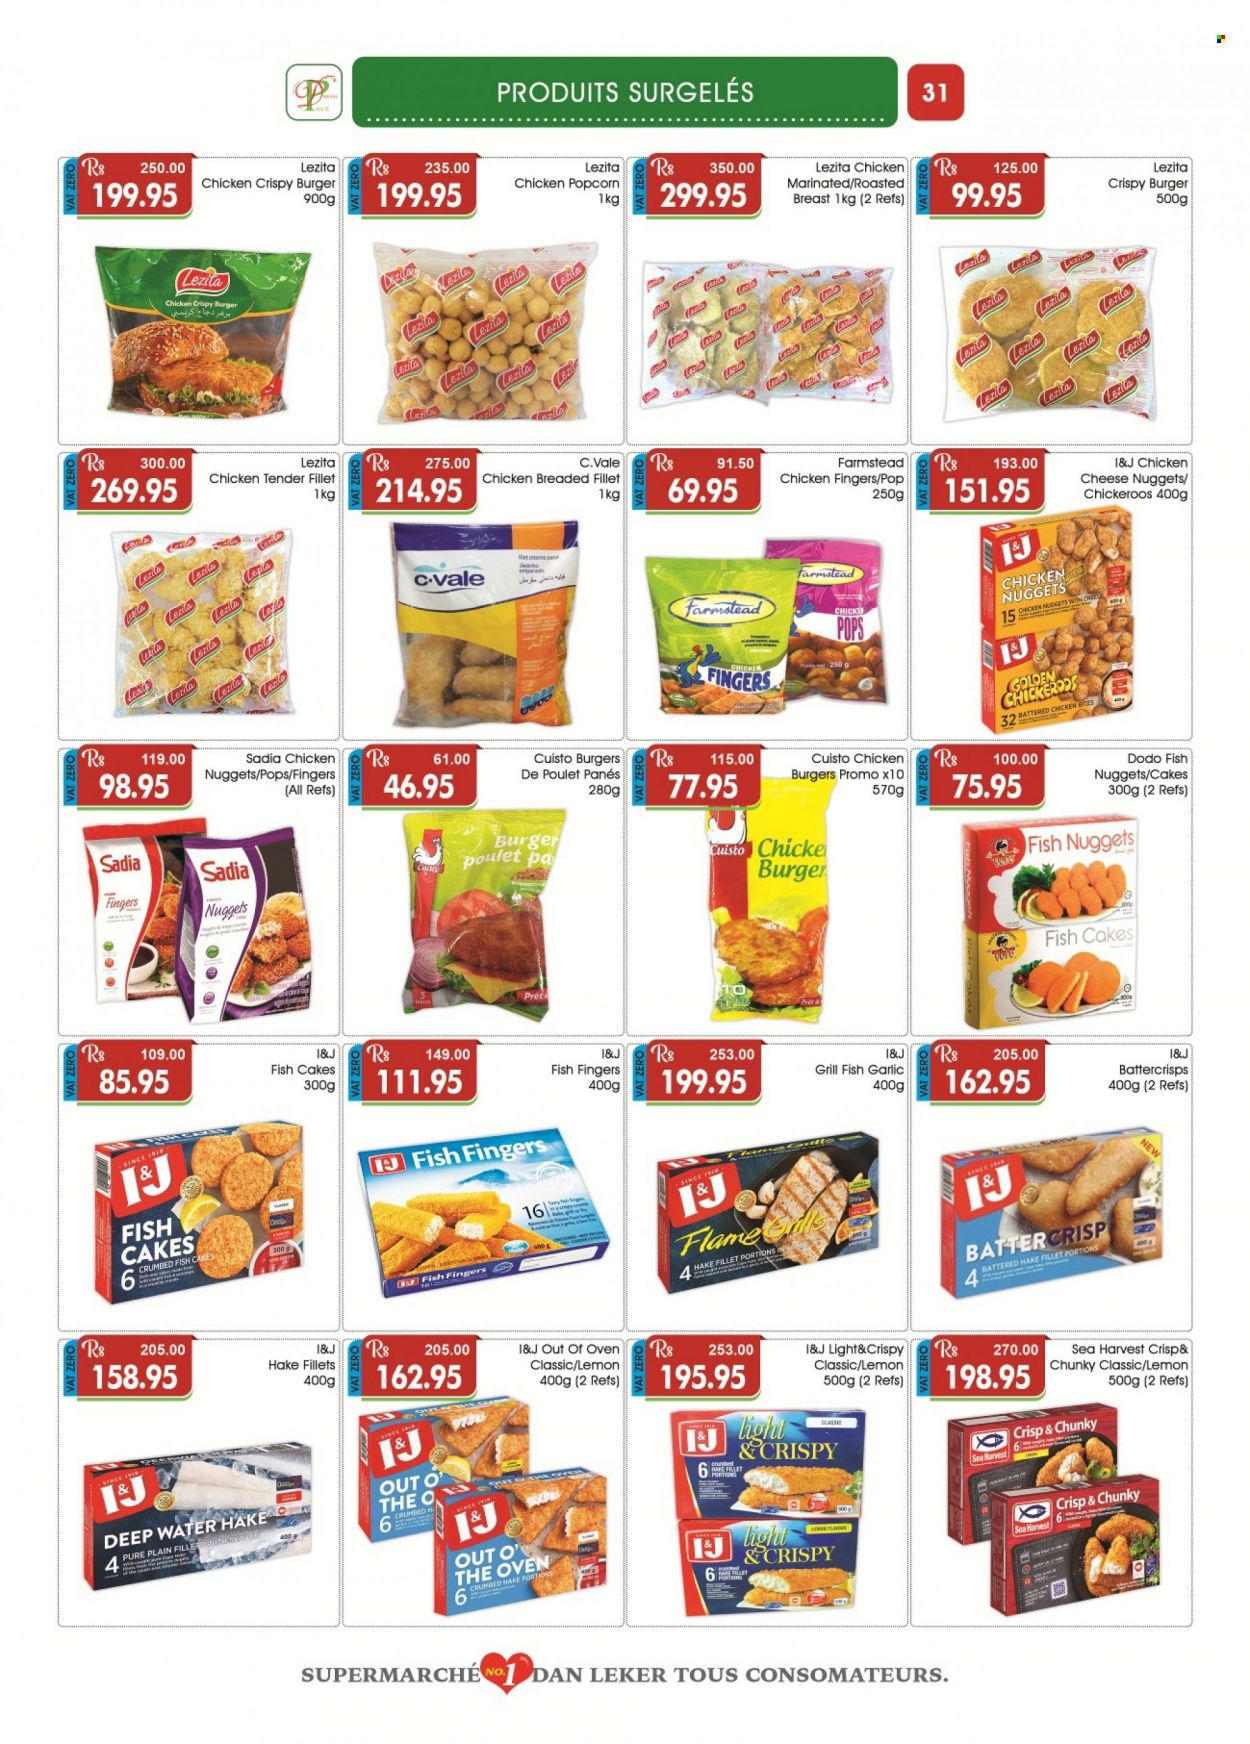 thumbnail - Dreamprice Catalogue - 21.01.2023 - 19.02.2023 - Sales products - garlic, hake, fish, crumbed fish, fish nuggets, fish fingers, Sea Harvest, fish sticks, hamburger, chicken nuggets, cheese nuggets, Out o' the Oven, cheese, chicken bites, fish cake, popcorn. Page 31.